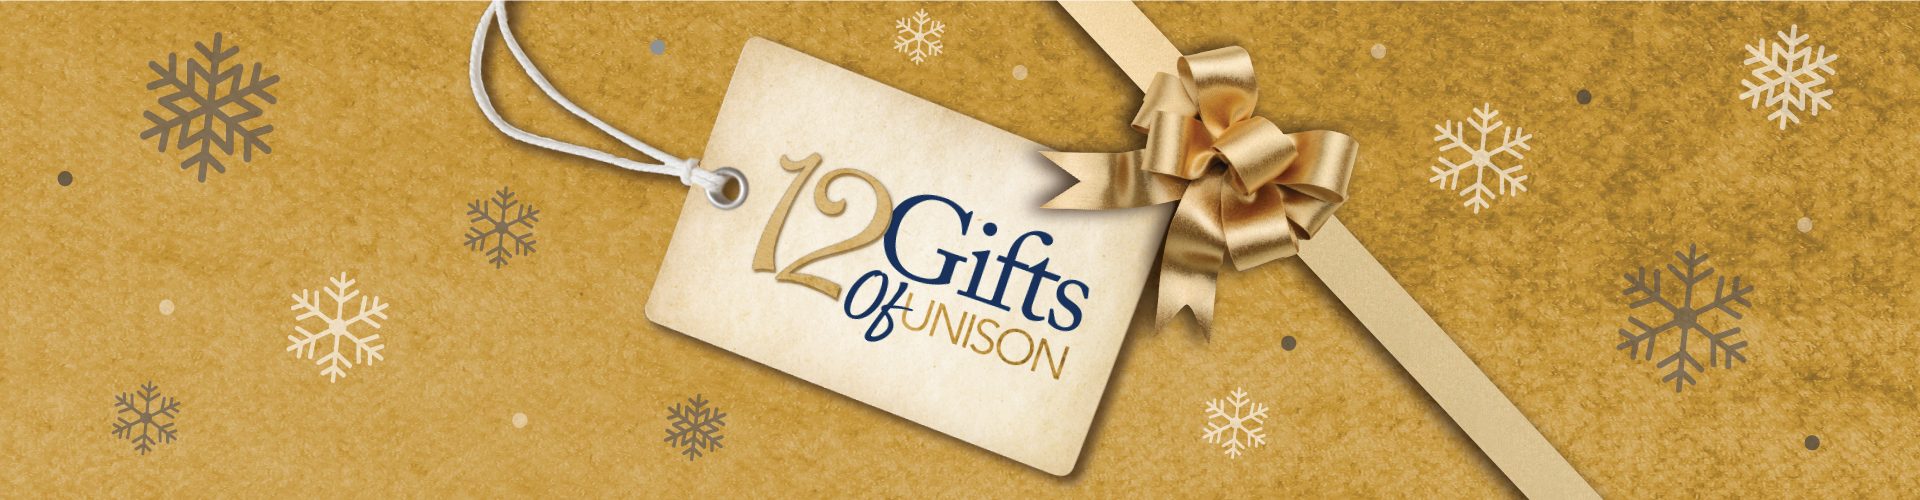 12 Gifts of Unison graphic banner